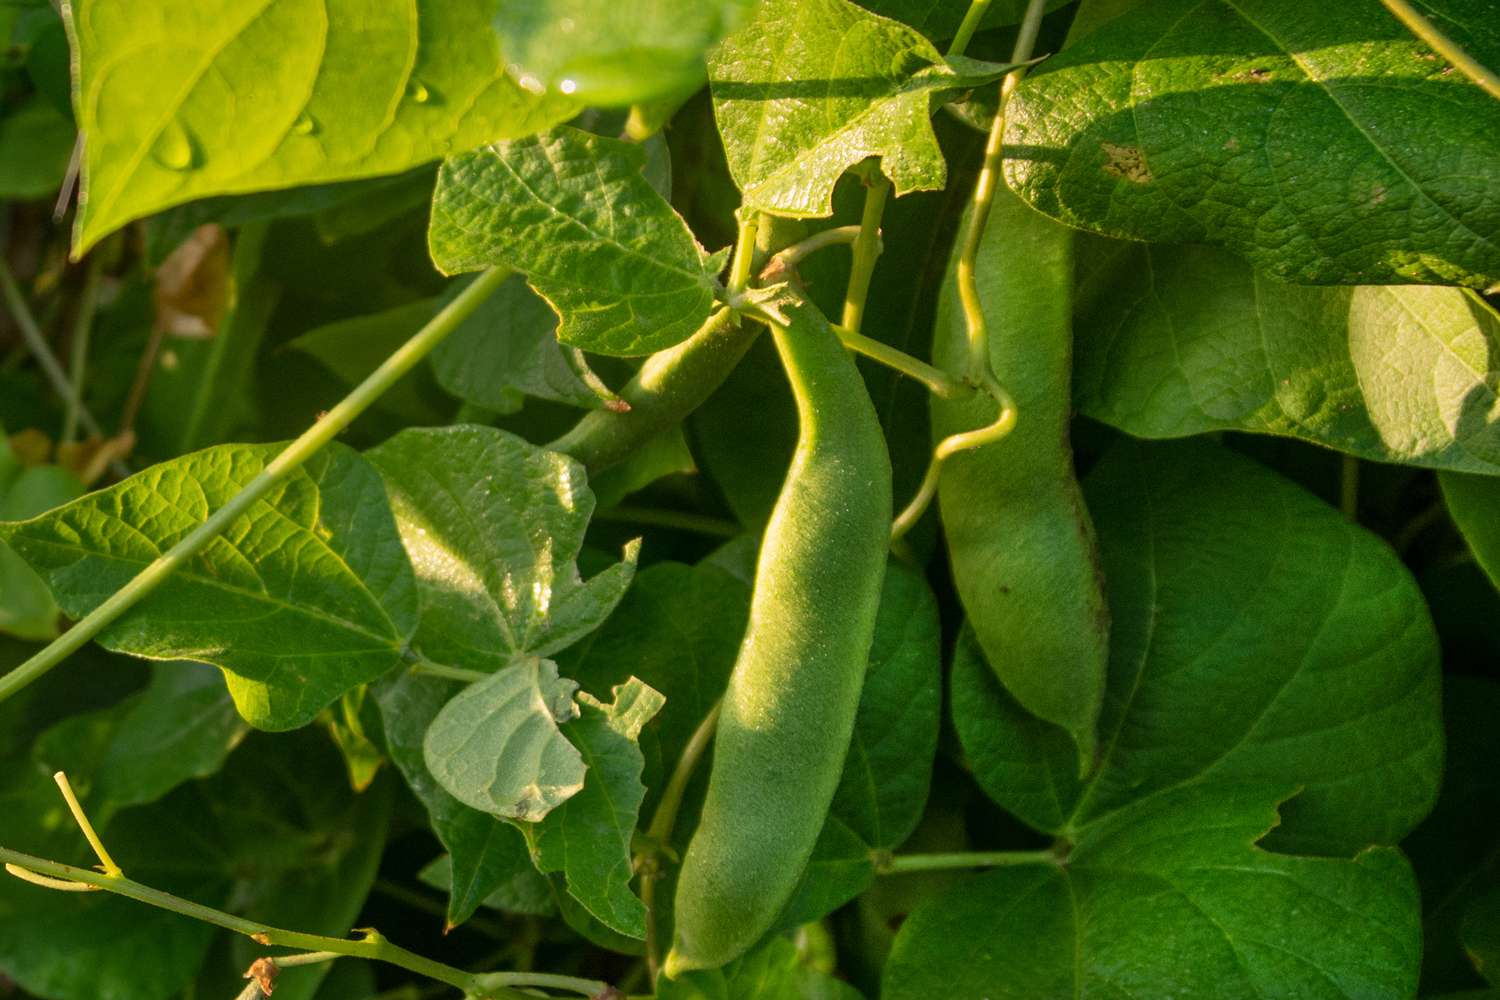 Heirloom pole beans hanging from vine with large leaves surrounding closeup